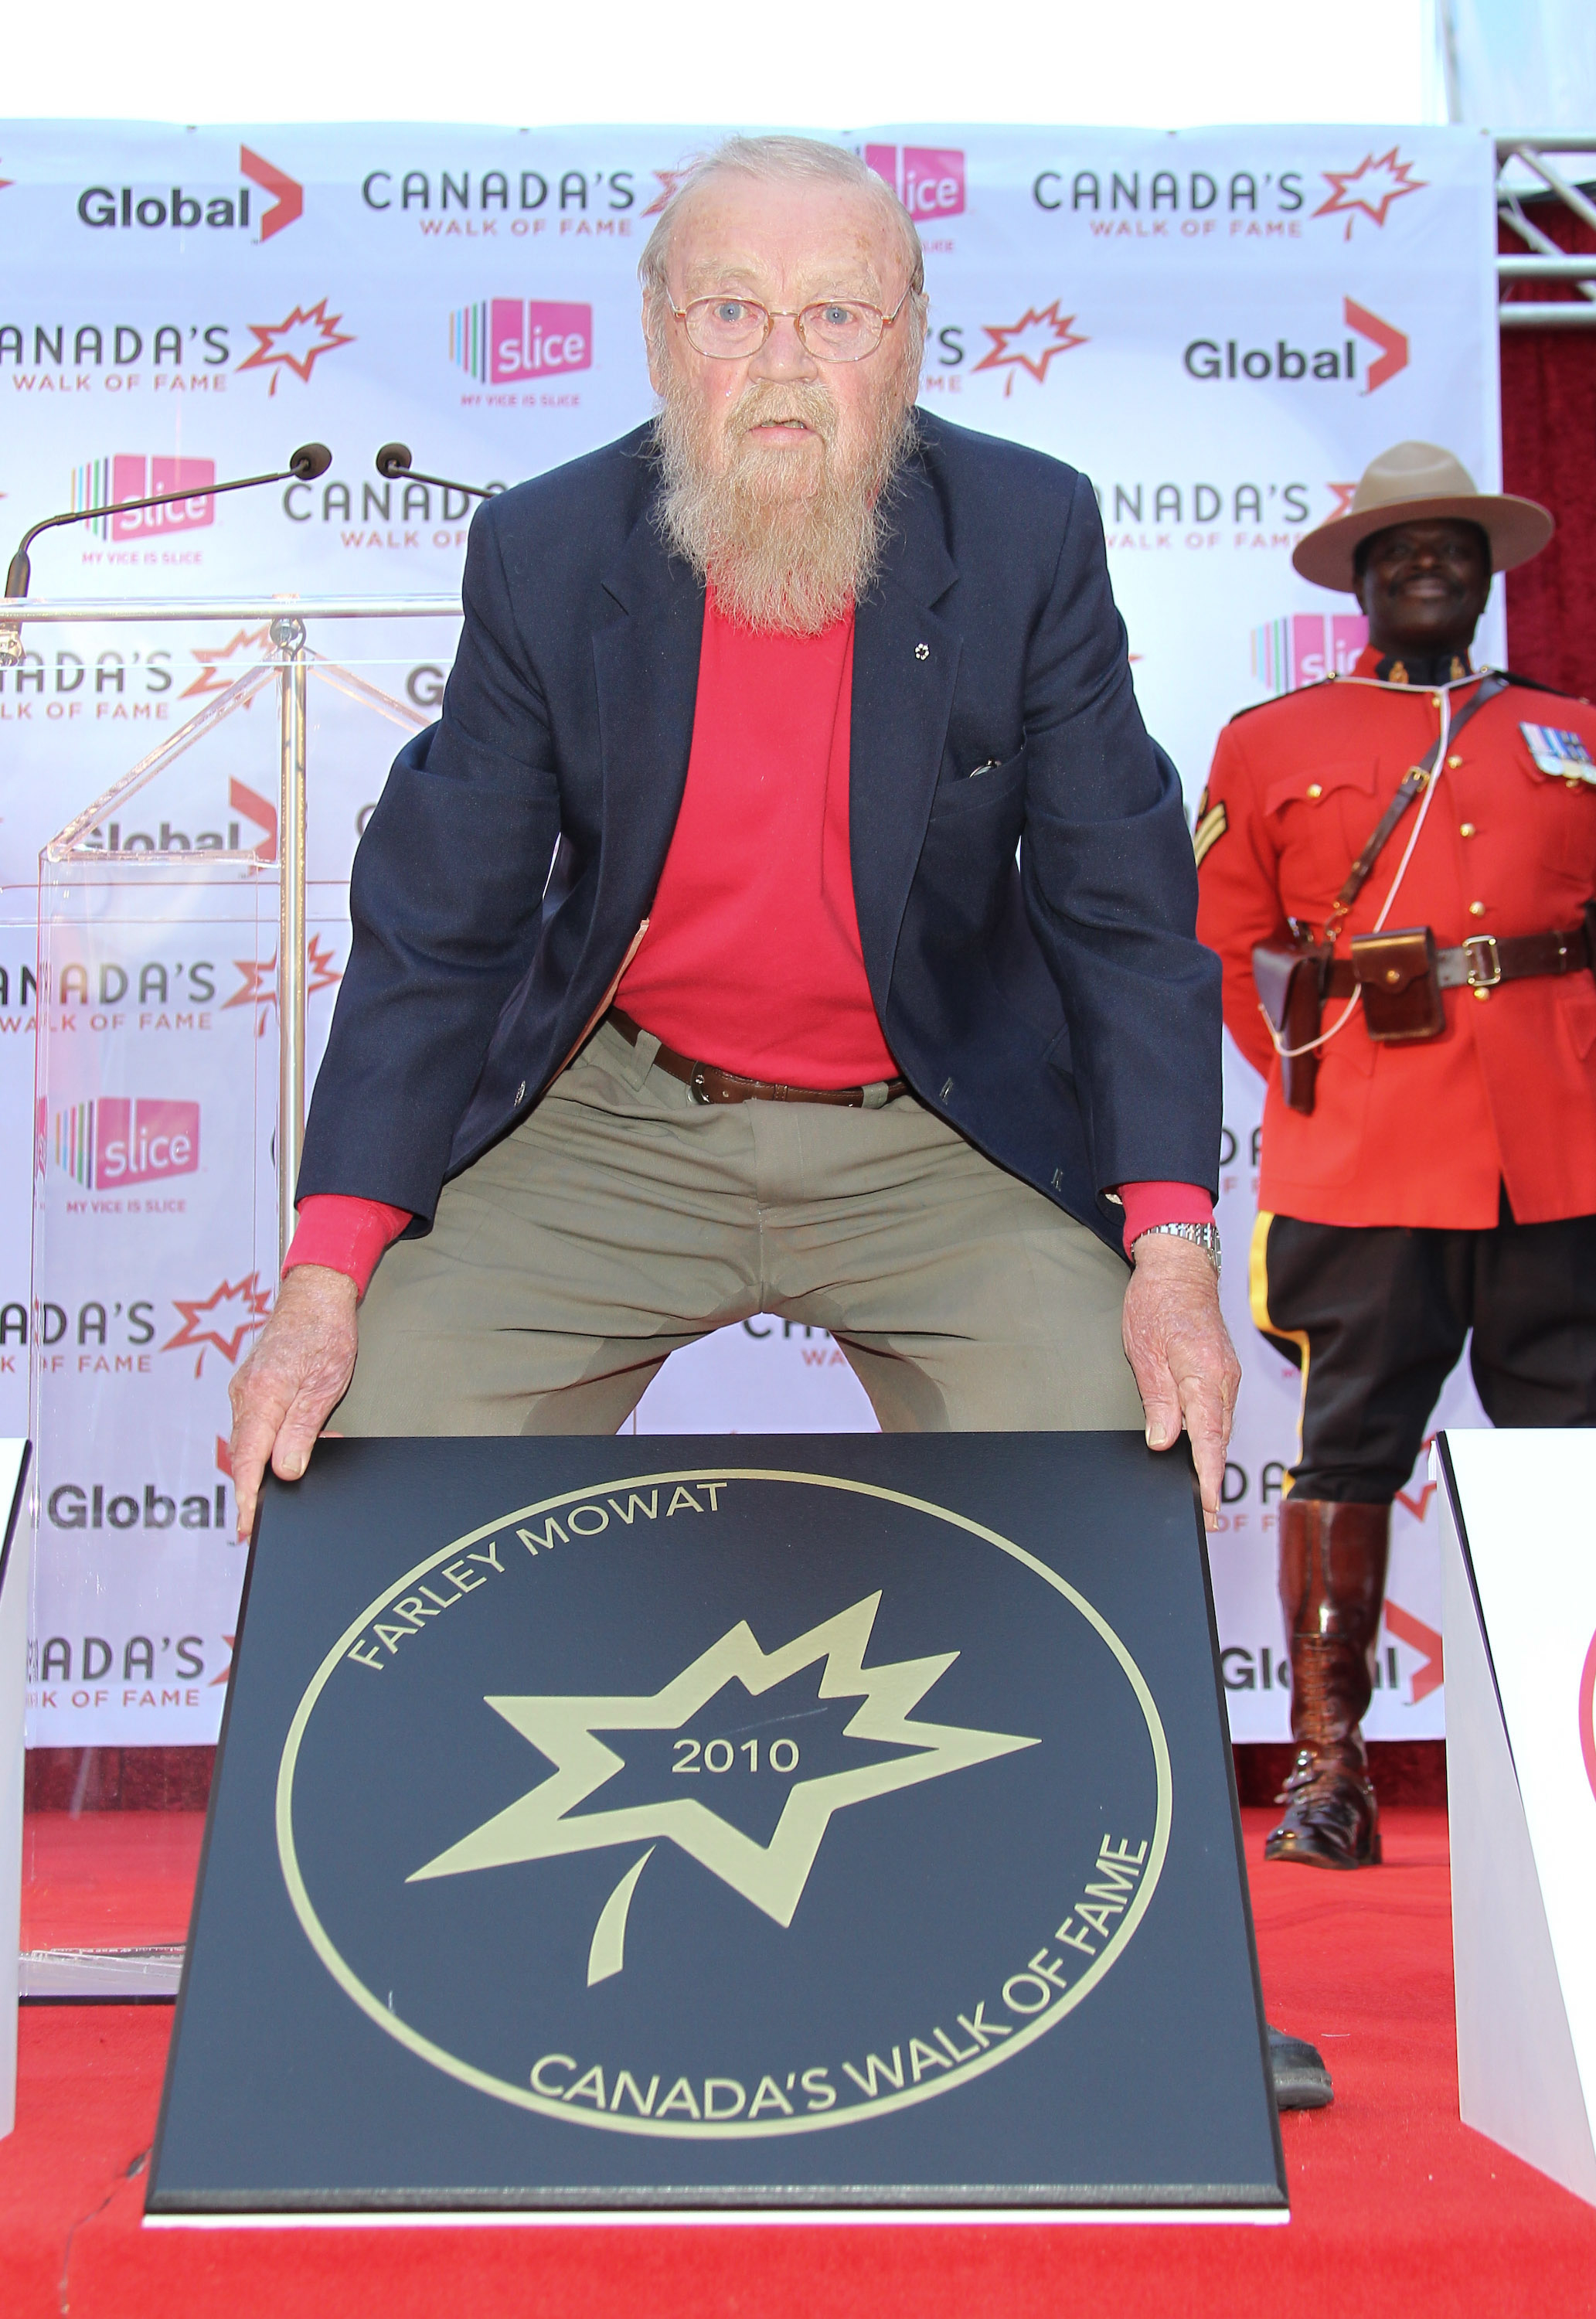 Farley Mowat holding his &quot;Canada&#x27;s Walk of Fame 2010&quot; plaque, with a Royal Canadian Mounted Police officer in the background